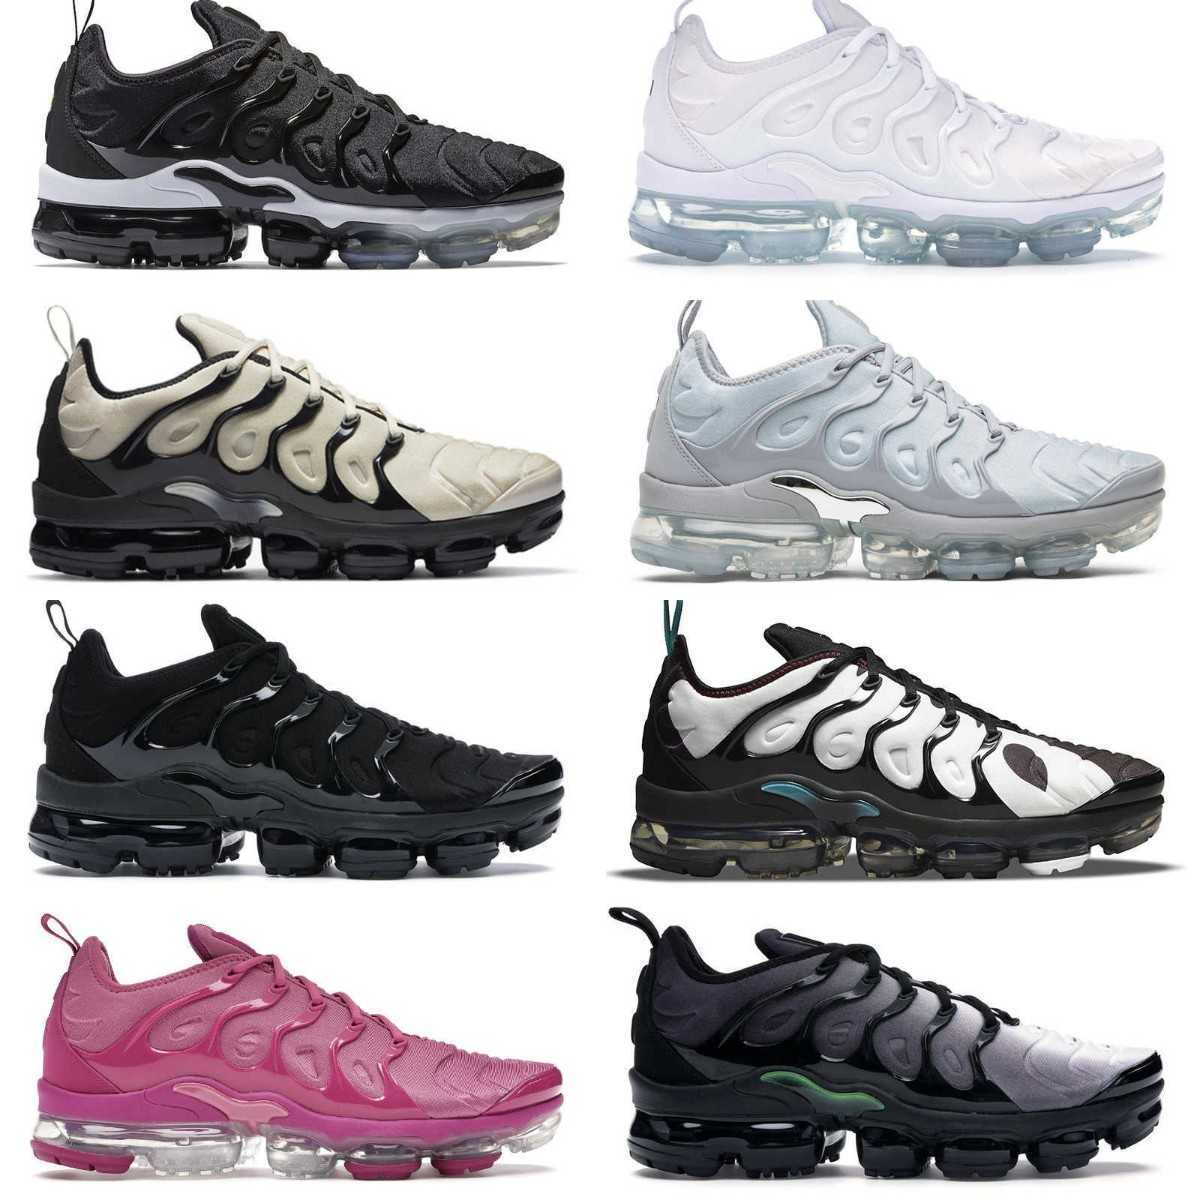 Trainer Griffey TN plus hommes Femmes Chaussures décontractées Vapores Triple Airs Cushion Black Red Blue Royal Volt Fireberry Berry Psychic Wolf Grey Designer Sports Sneakers